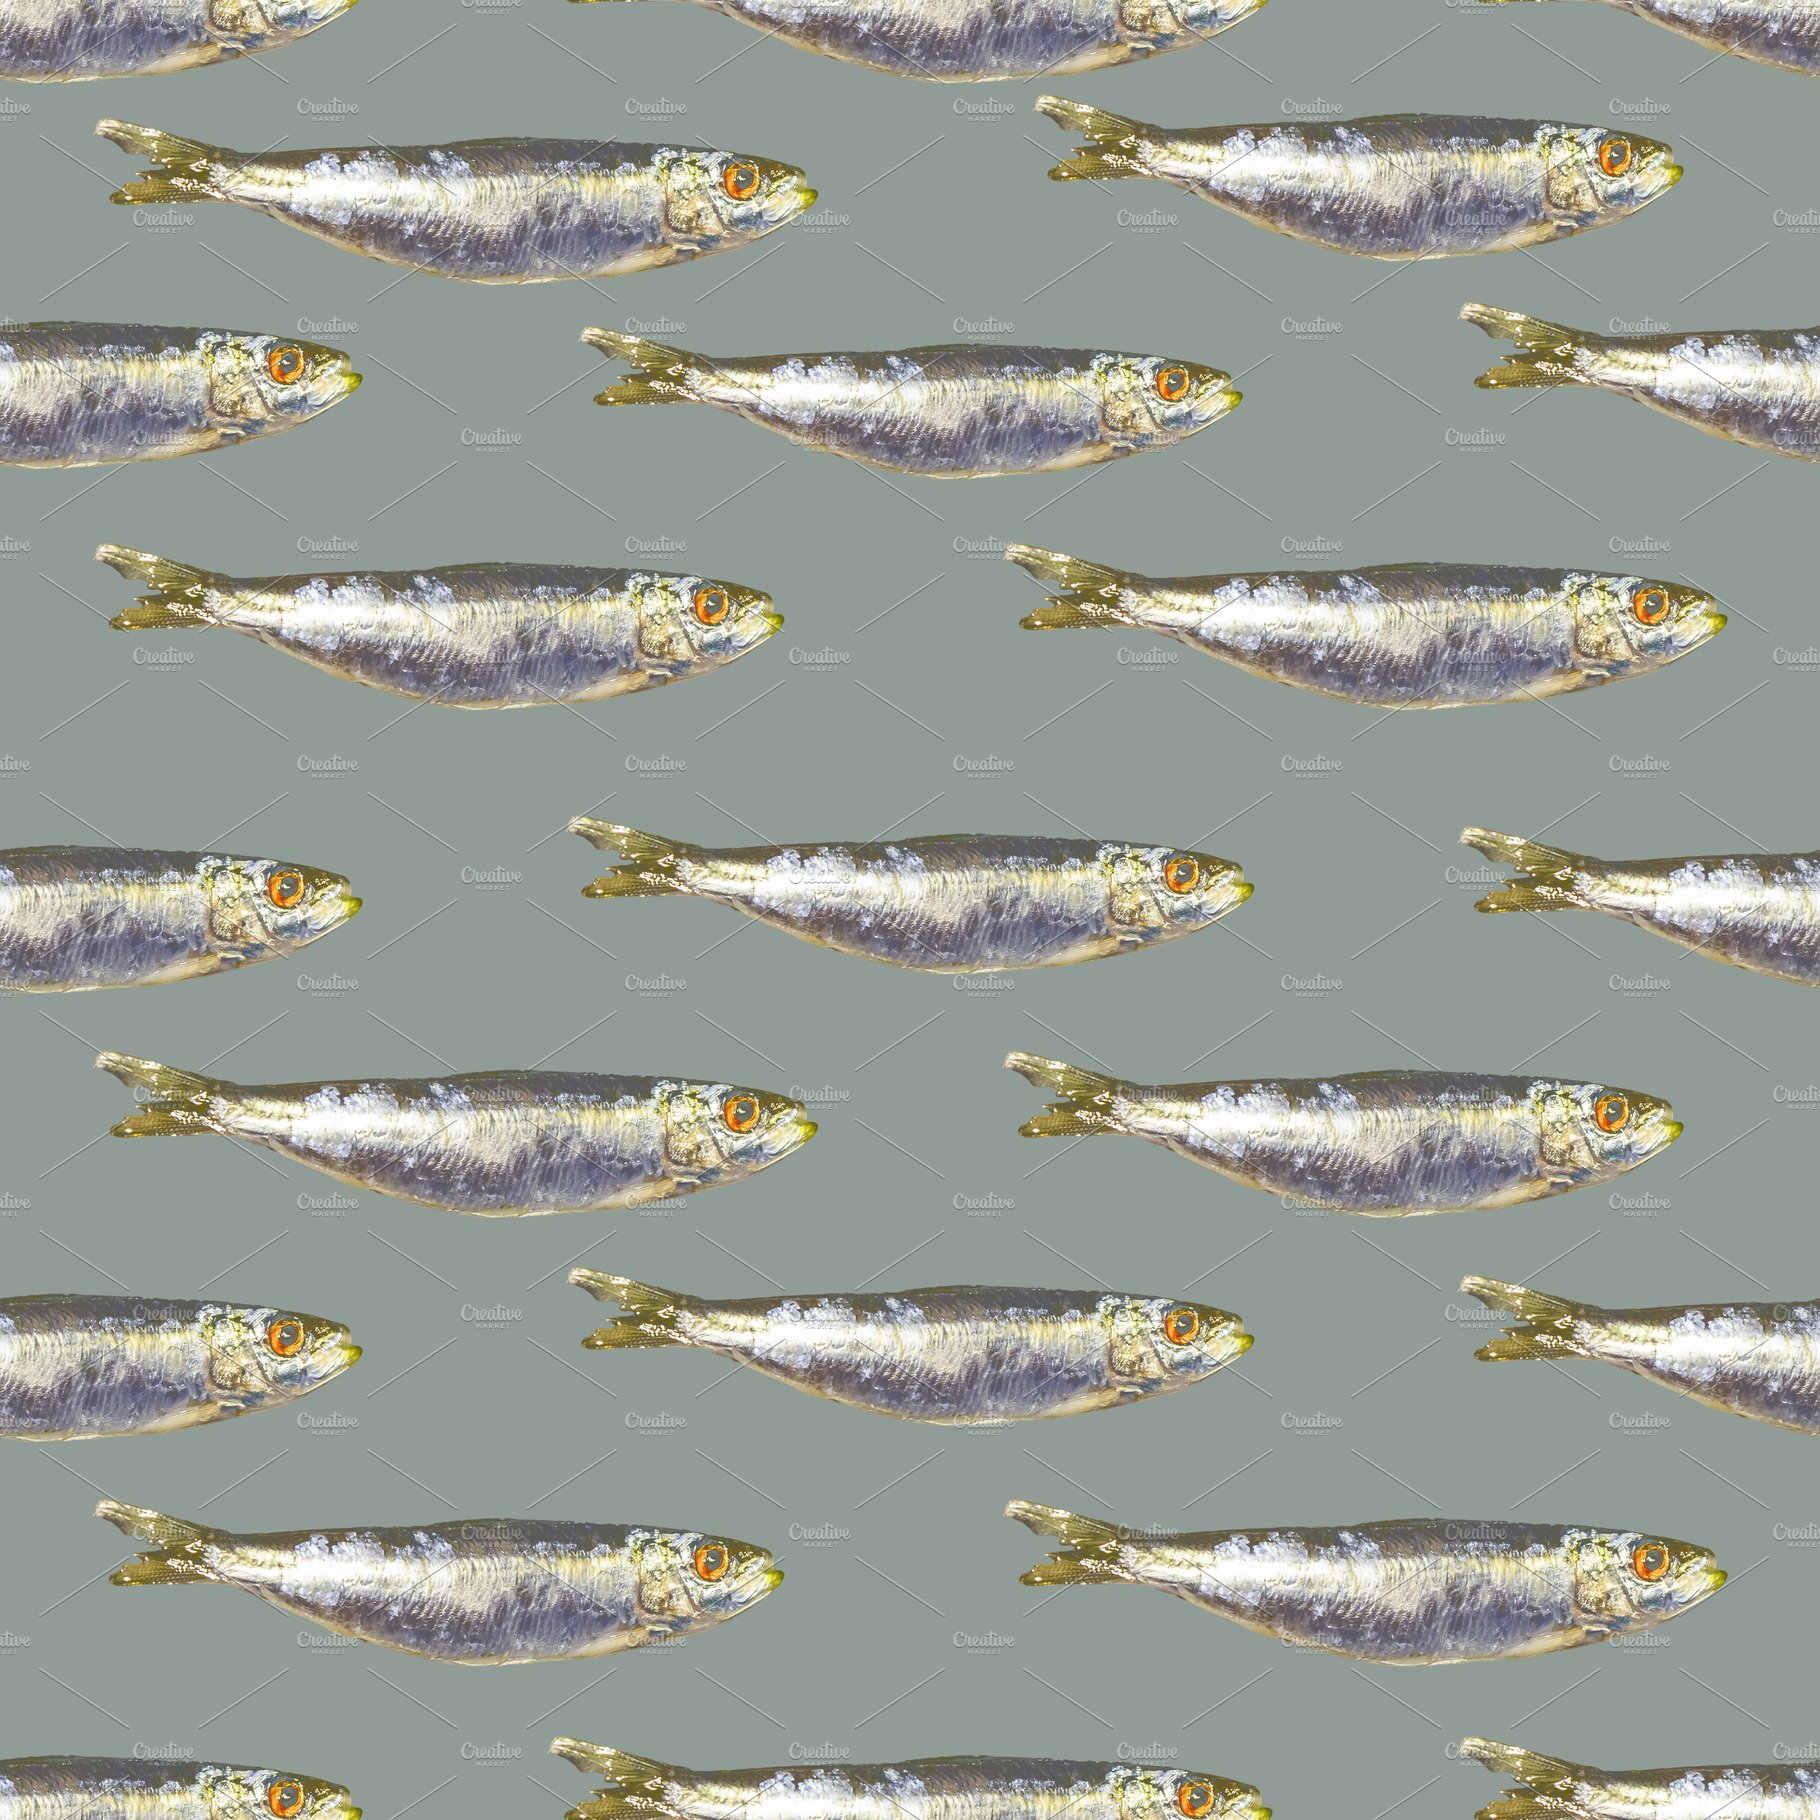 Anchovies Group Seamless Pattern cover image.